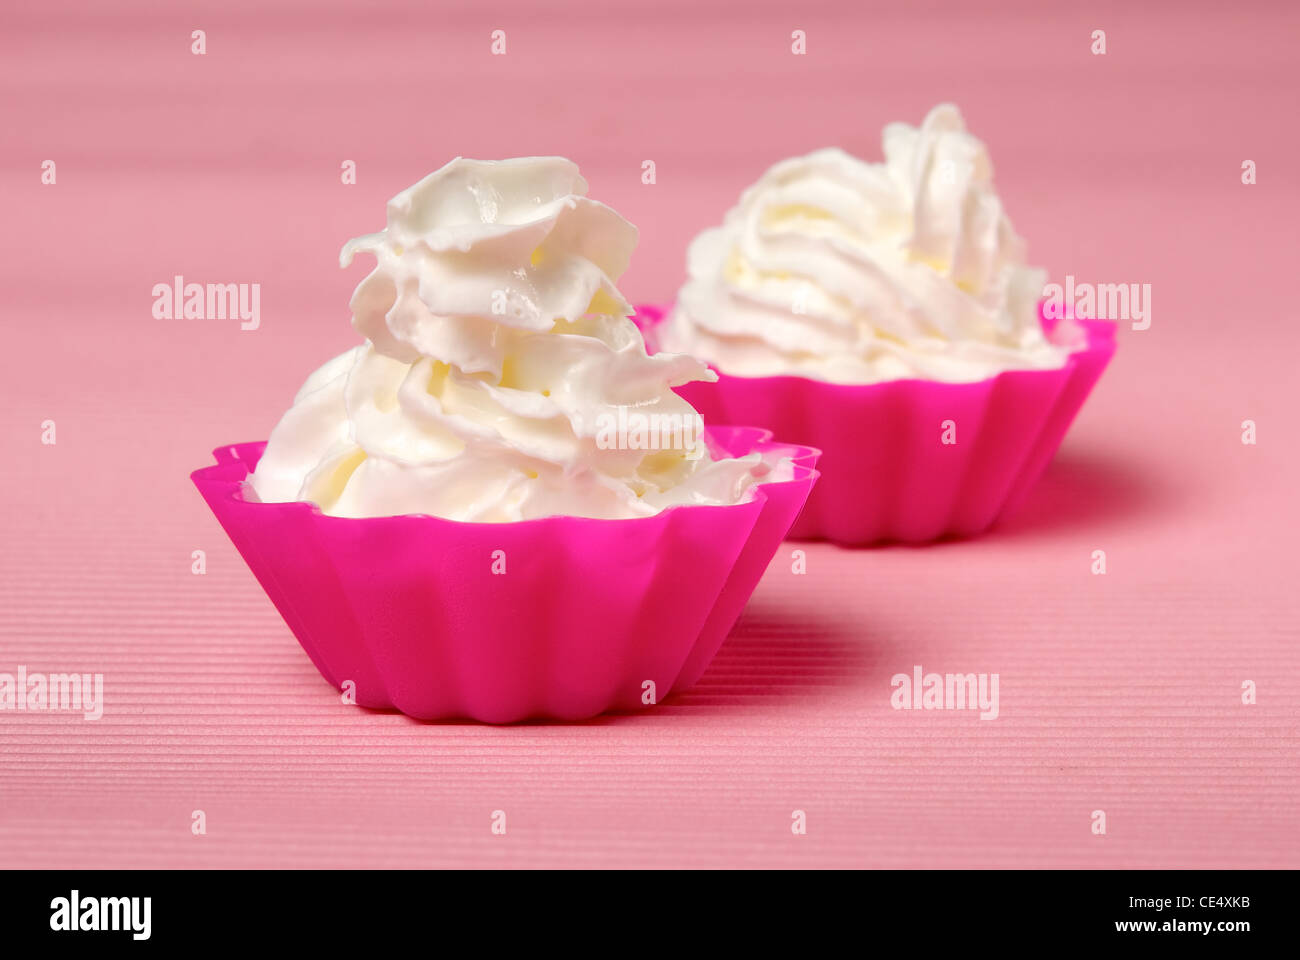 Two portions of whipped cream over pink background. Shallow DOF Stock Photo